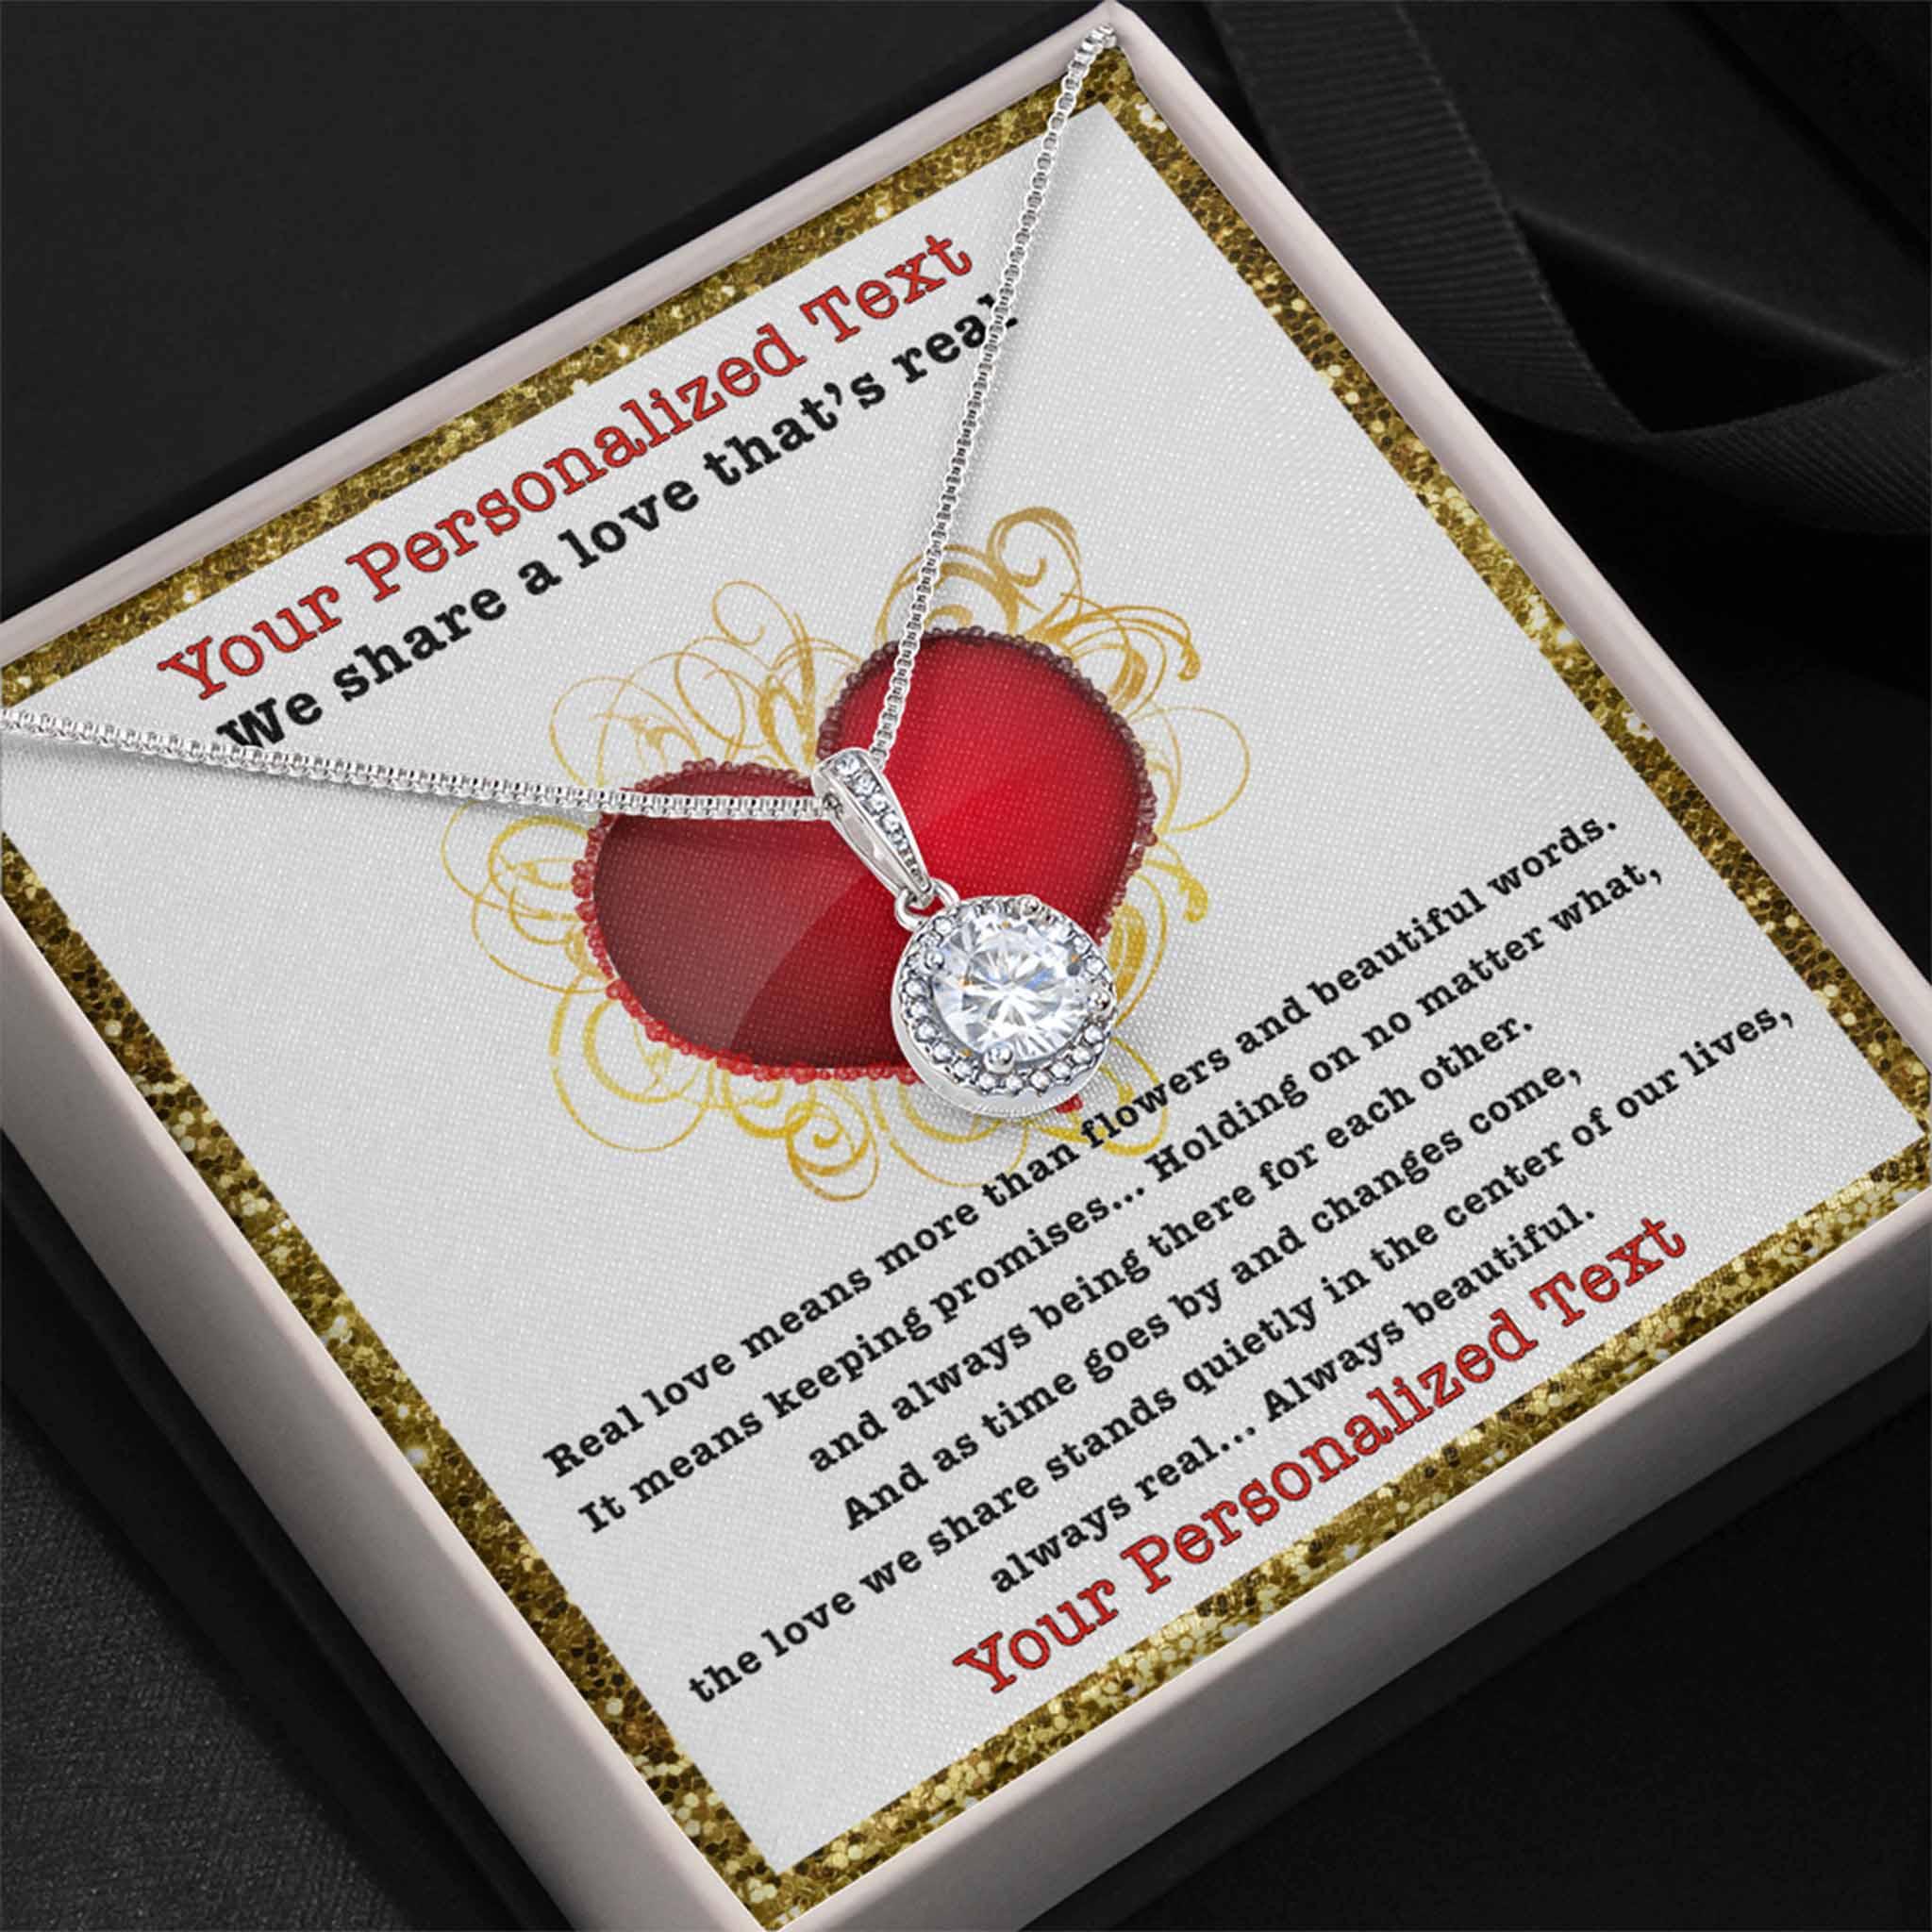 Eternal Hope Necklace We Share A Love Personalized Insert CardCustomly Gifts